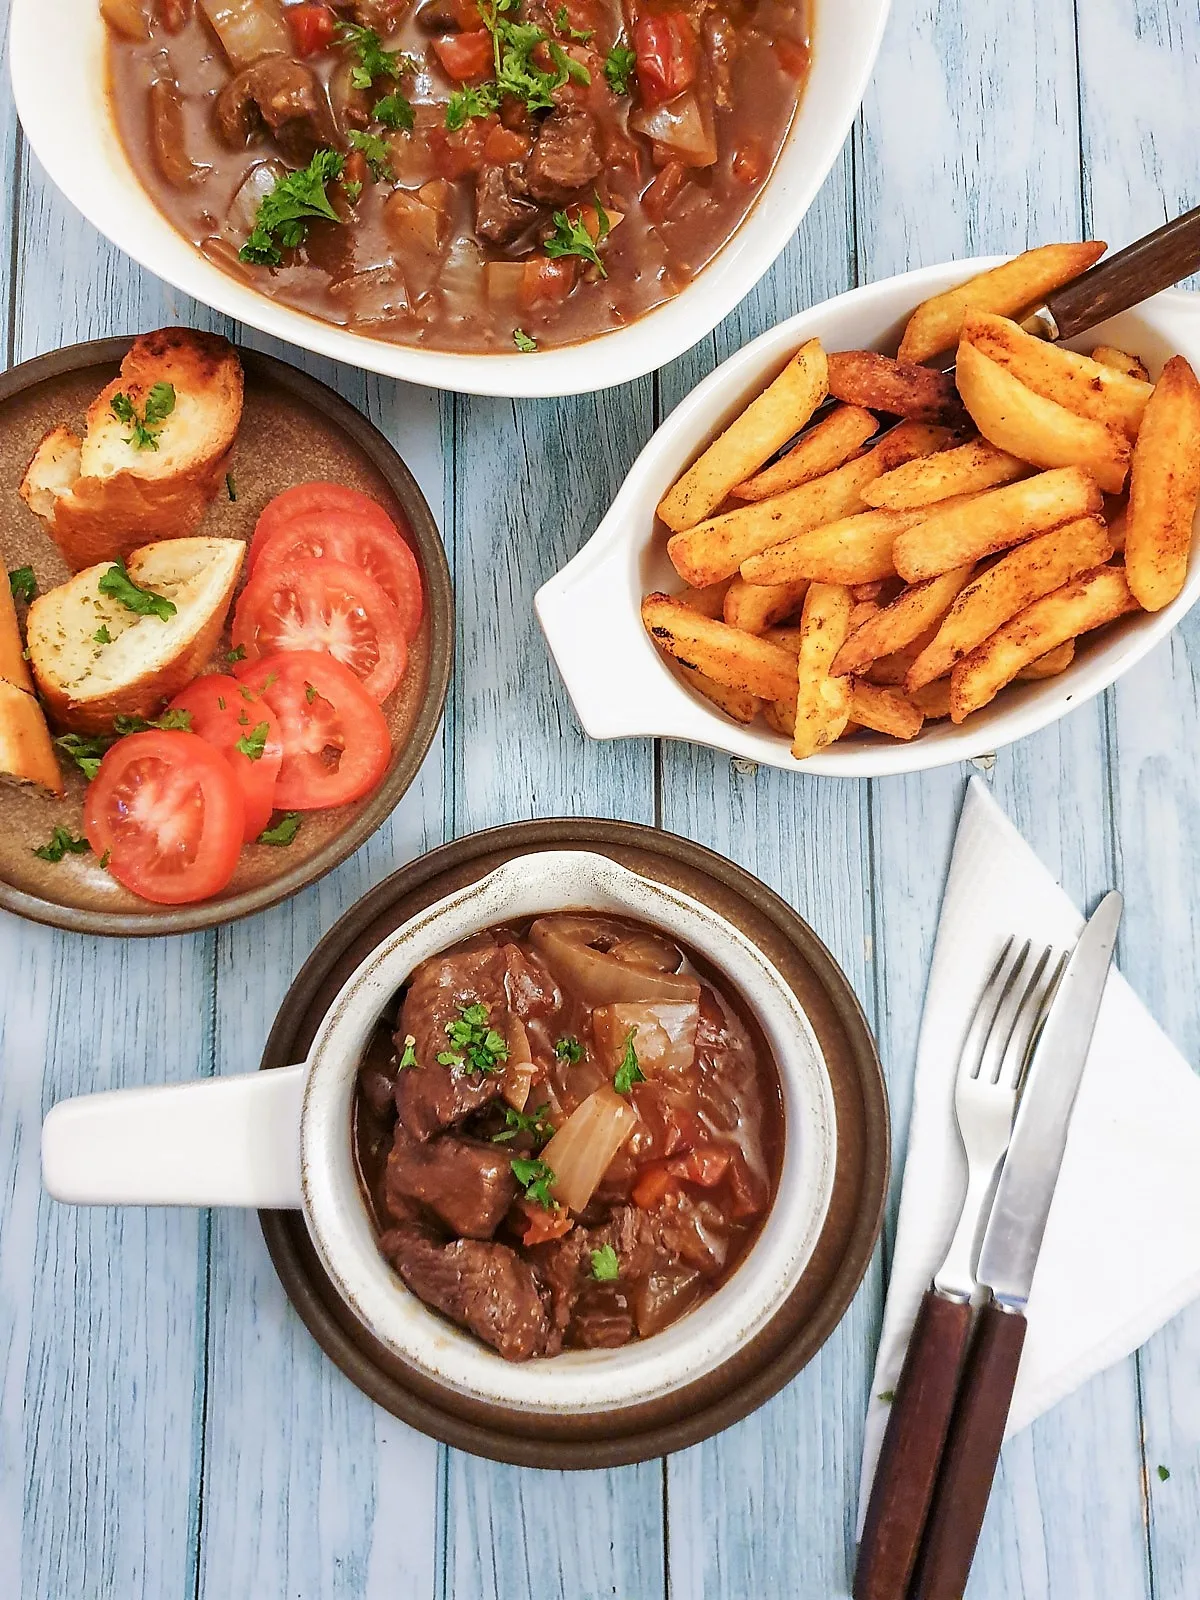 A bowl of beef trinchado served with fries, beans, and a plate of fresh tomatoes and lemons.